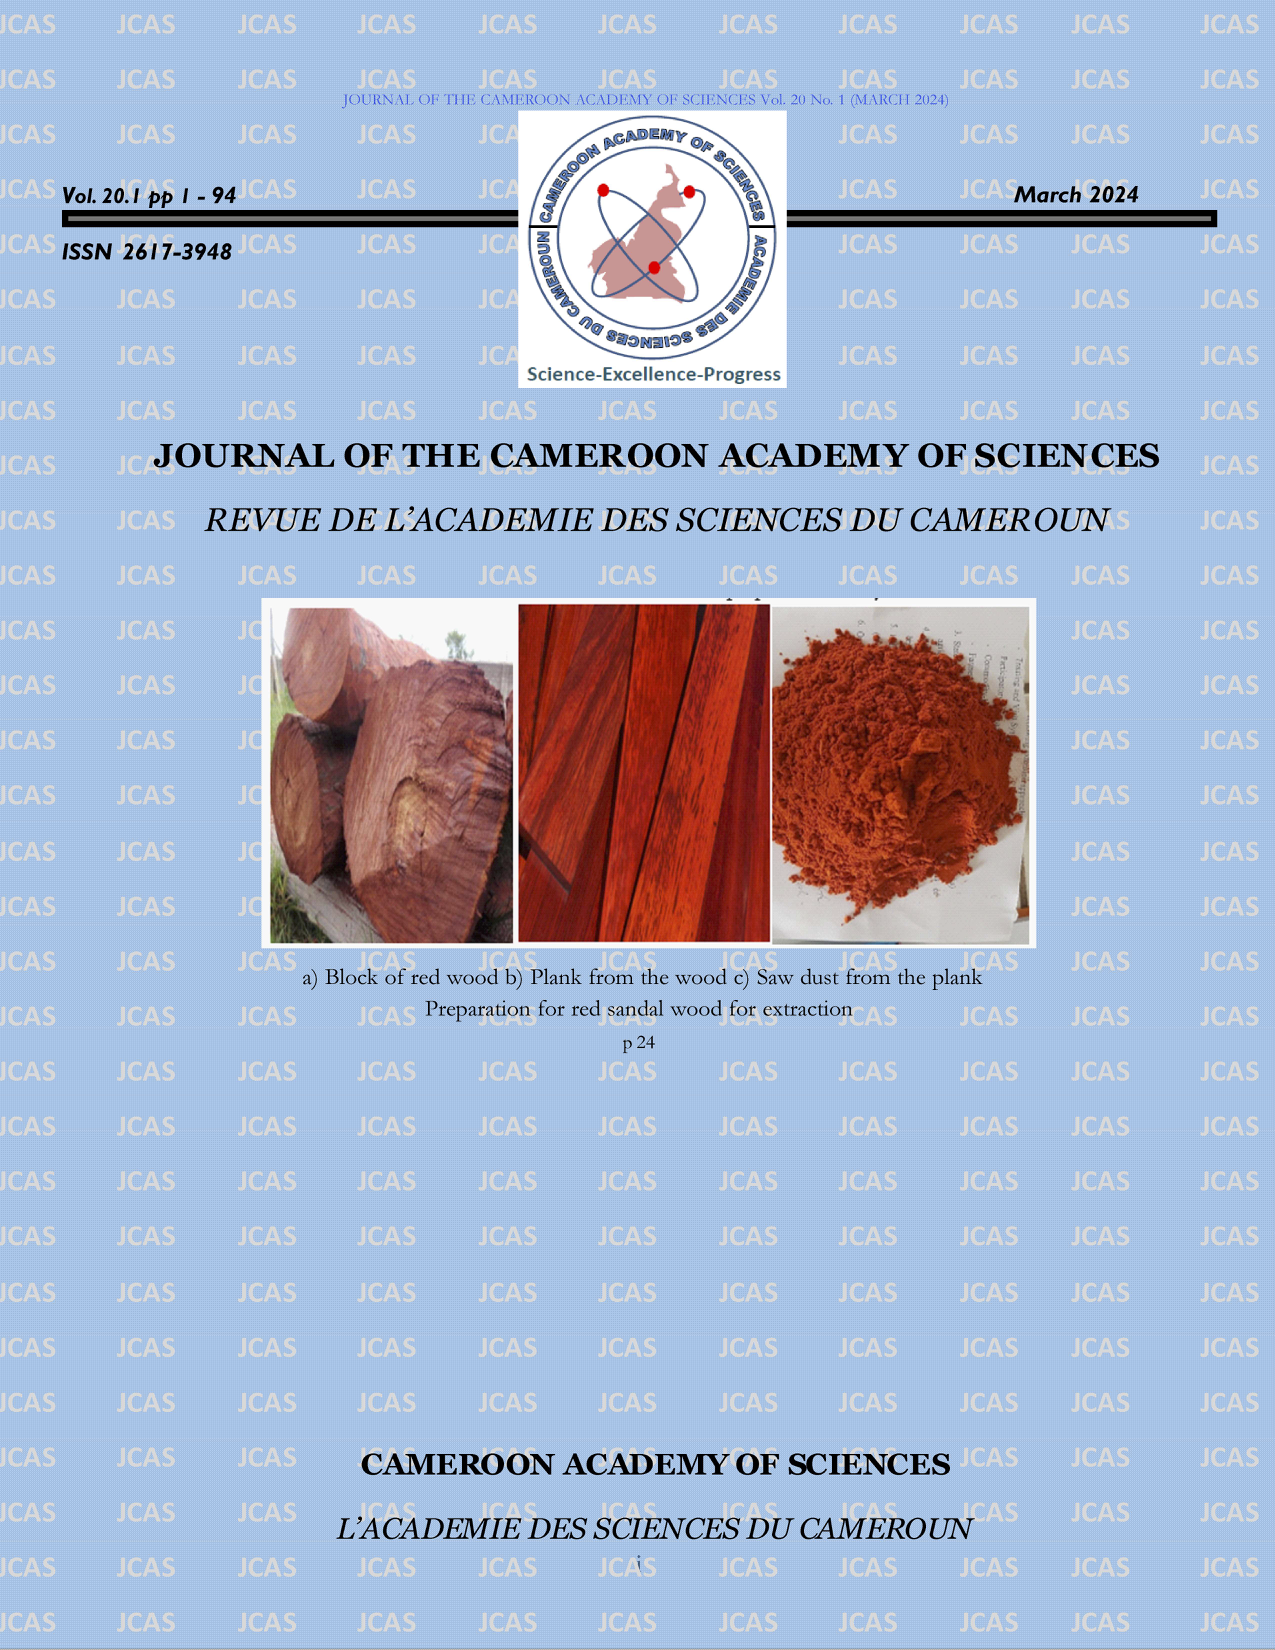 Journal of the Cameroon Academy of Sciences